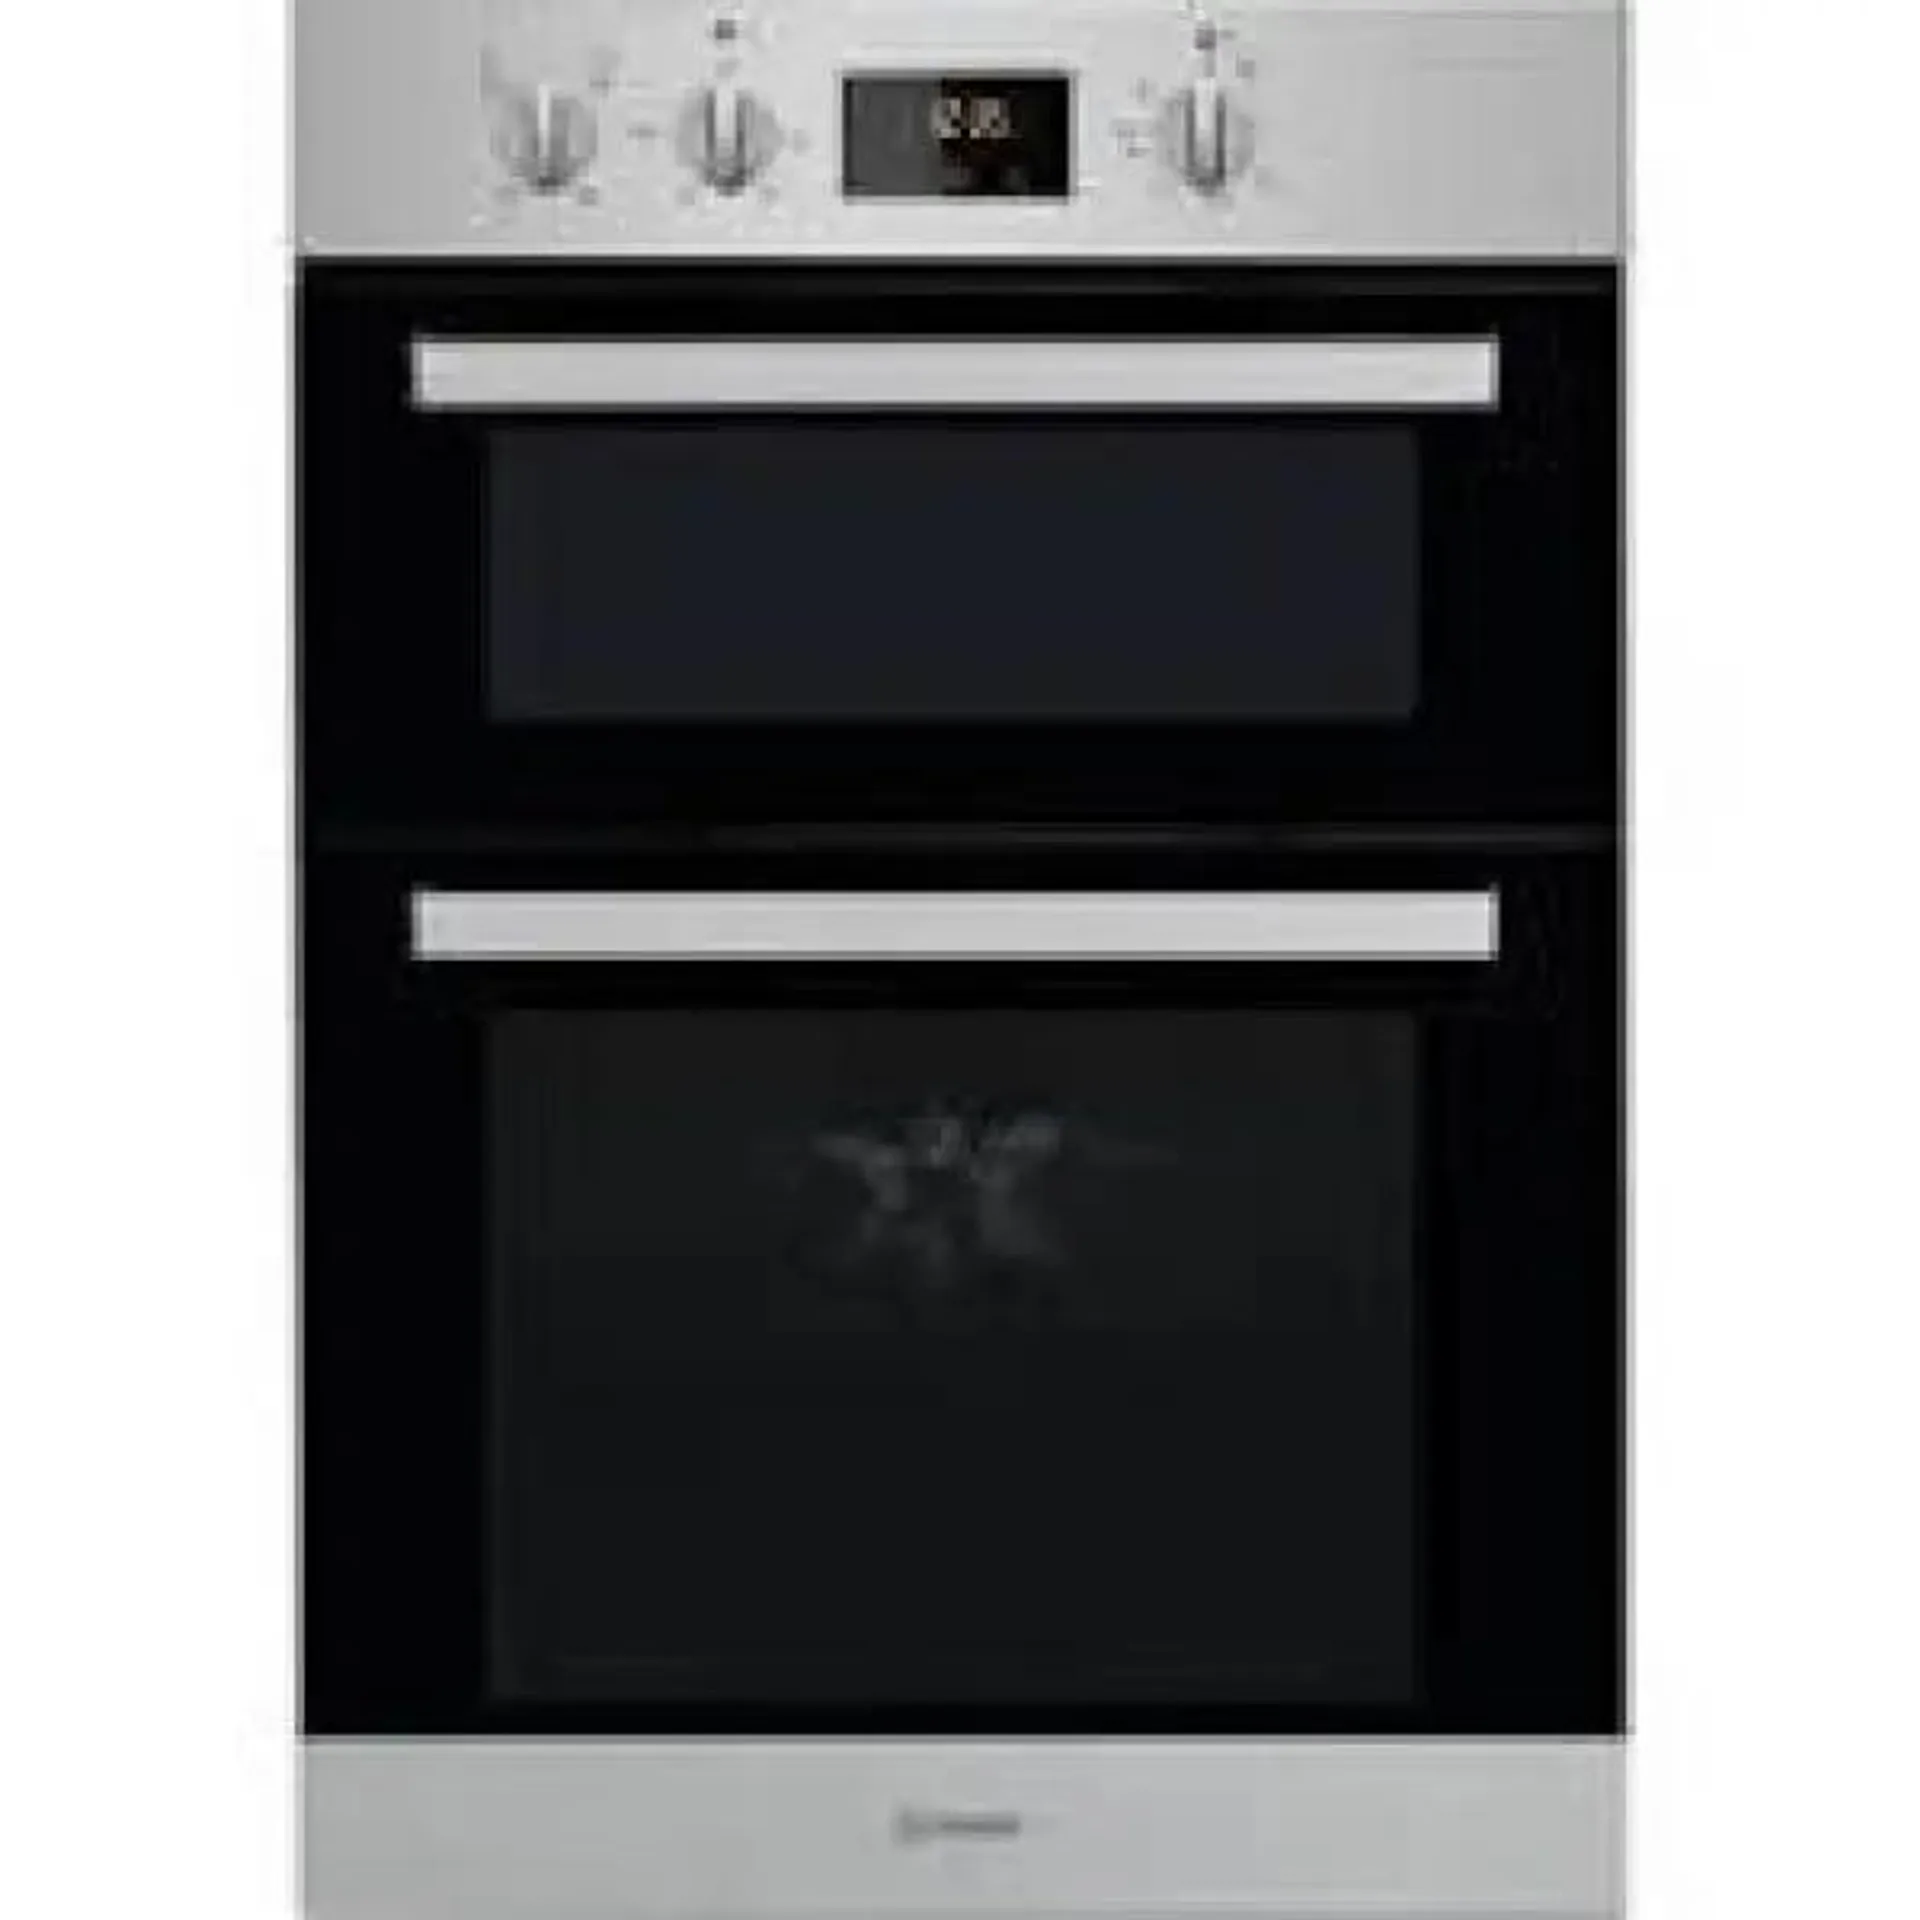 Indesit Built Under Double Oven – Stainless Steel